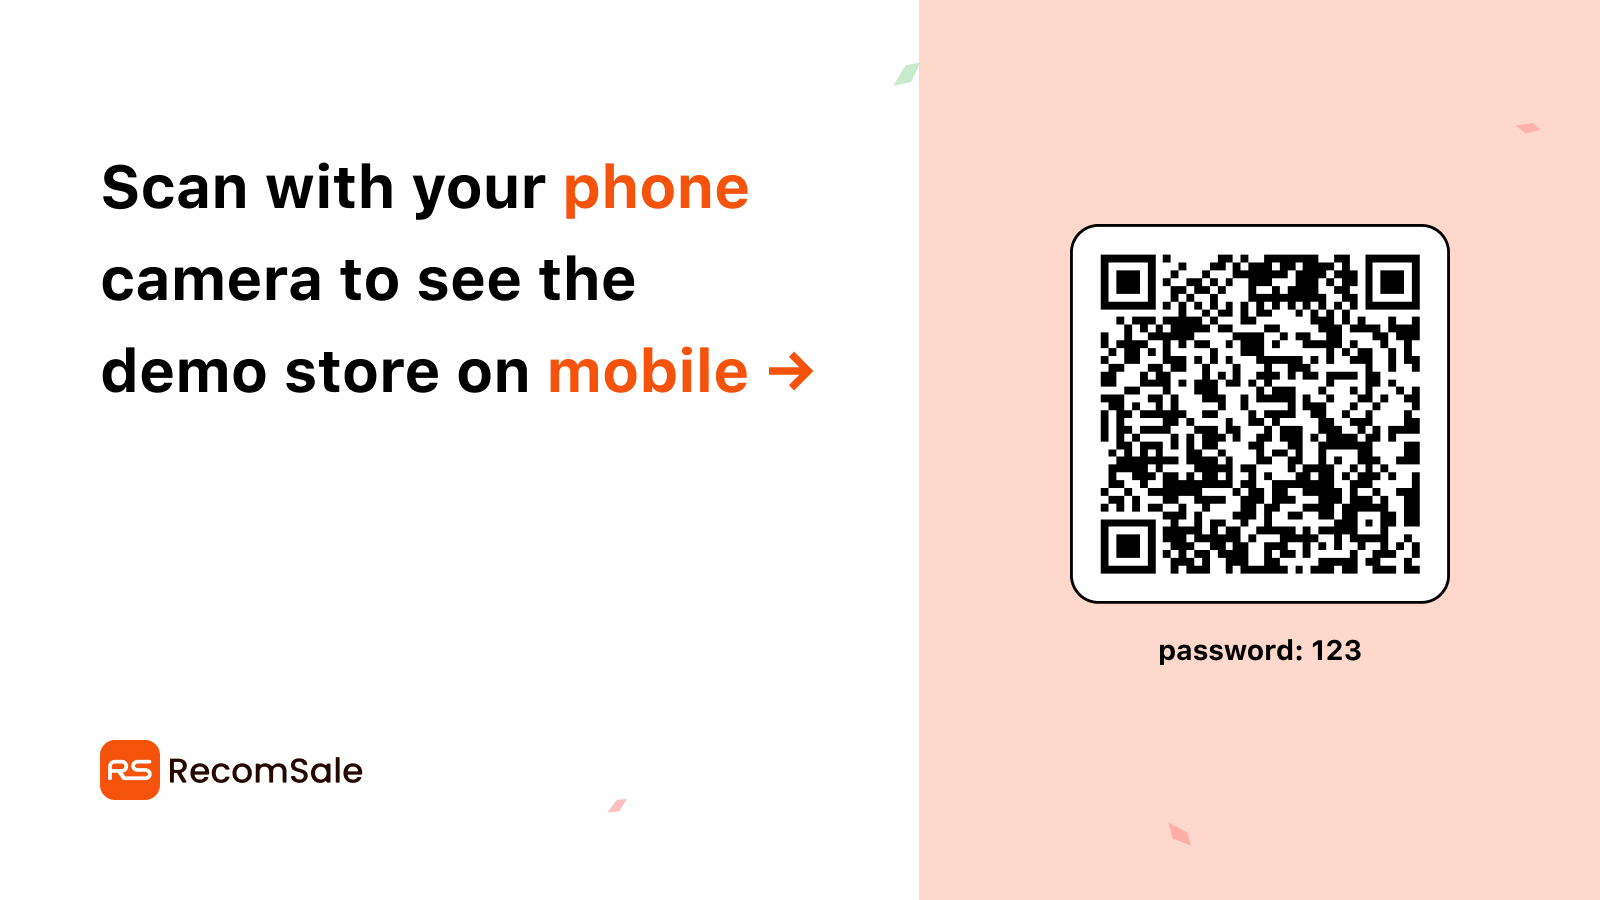 Scan with your phone camera to see the demo store on mobile